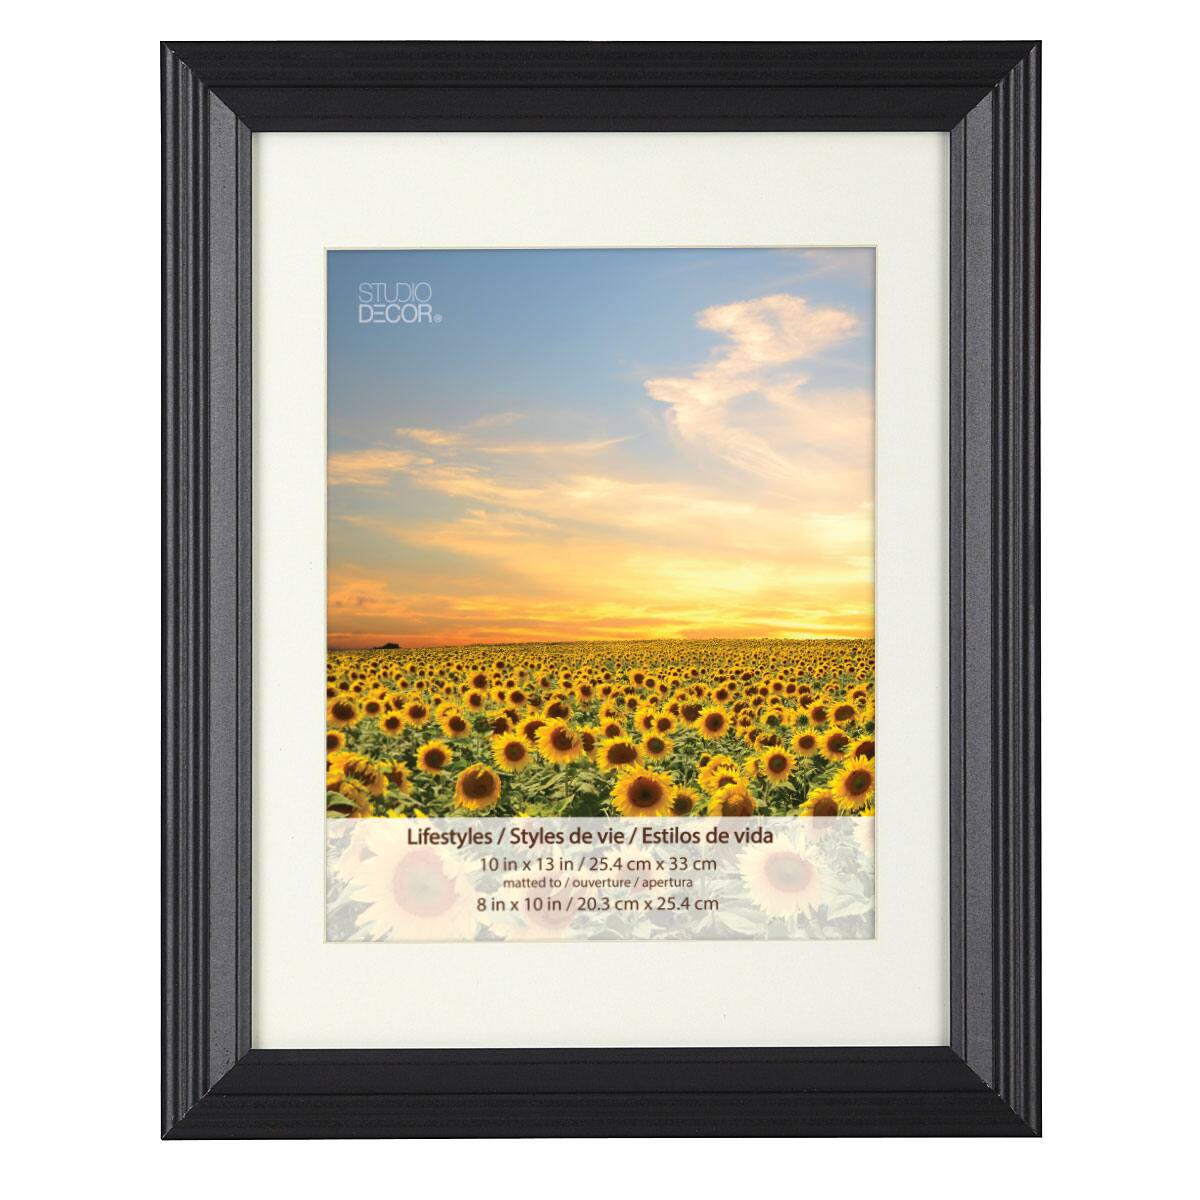 6 Pack: Black 8" x 10" Frame With Mat, Lifestyles™ by Studio Décor